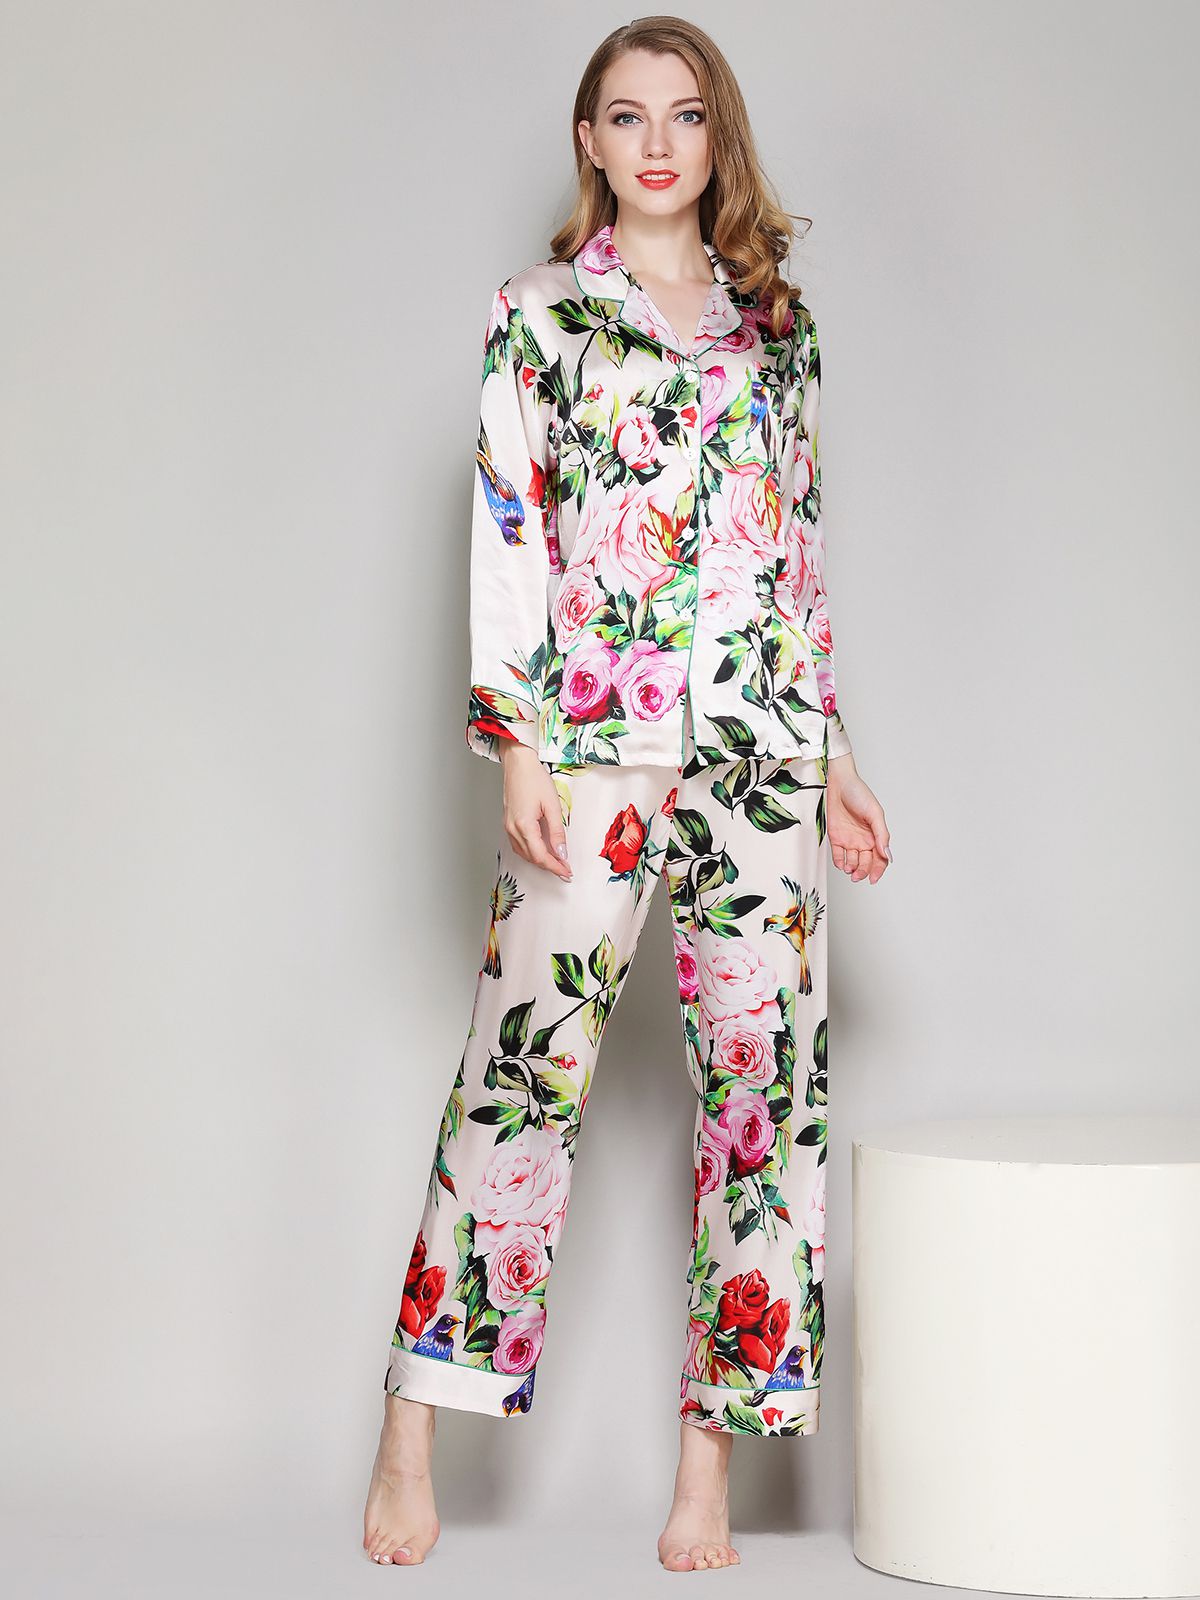 19 Momme Ivory Floral Printed Women Silk Pajama Set [FS053] - $199.00 ...